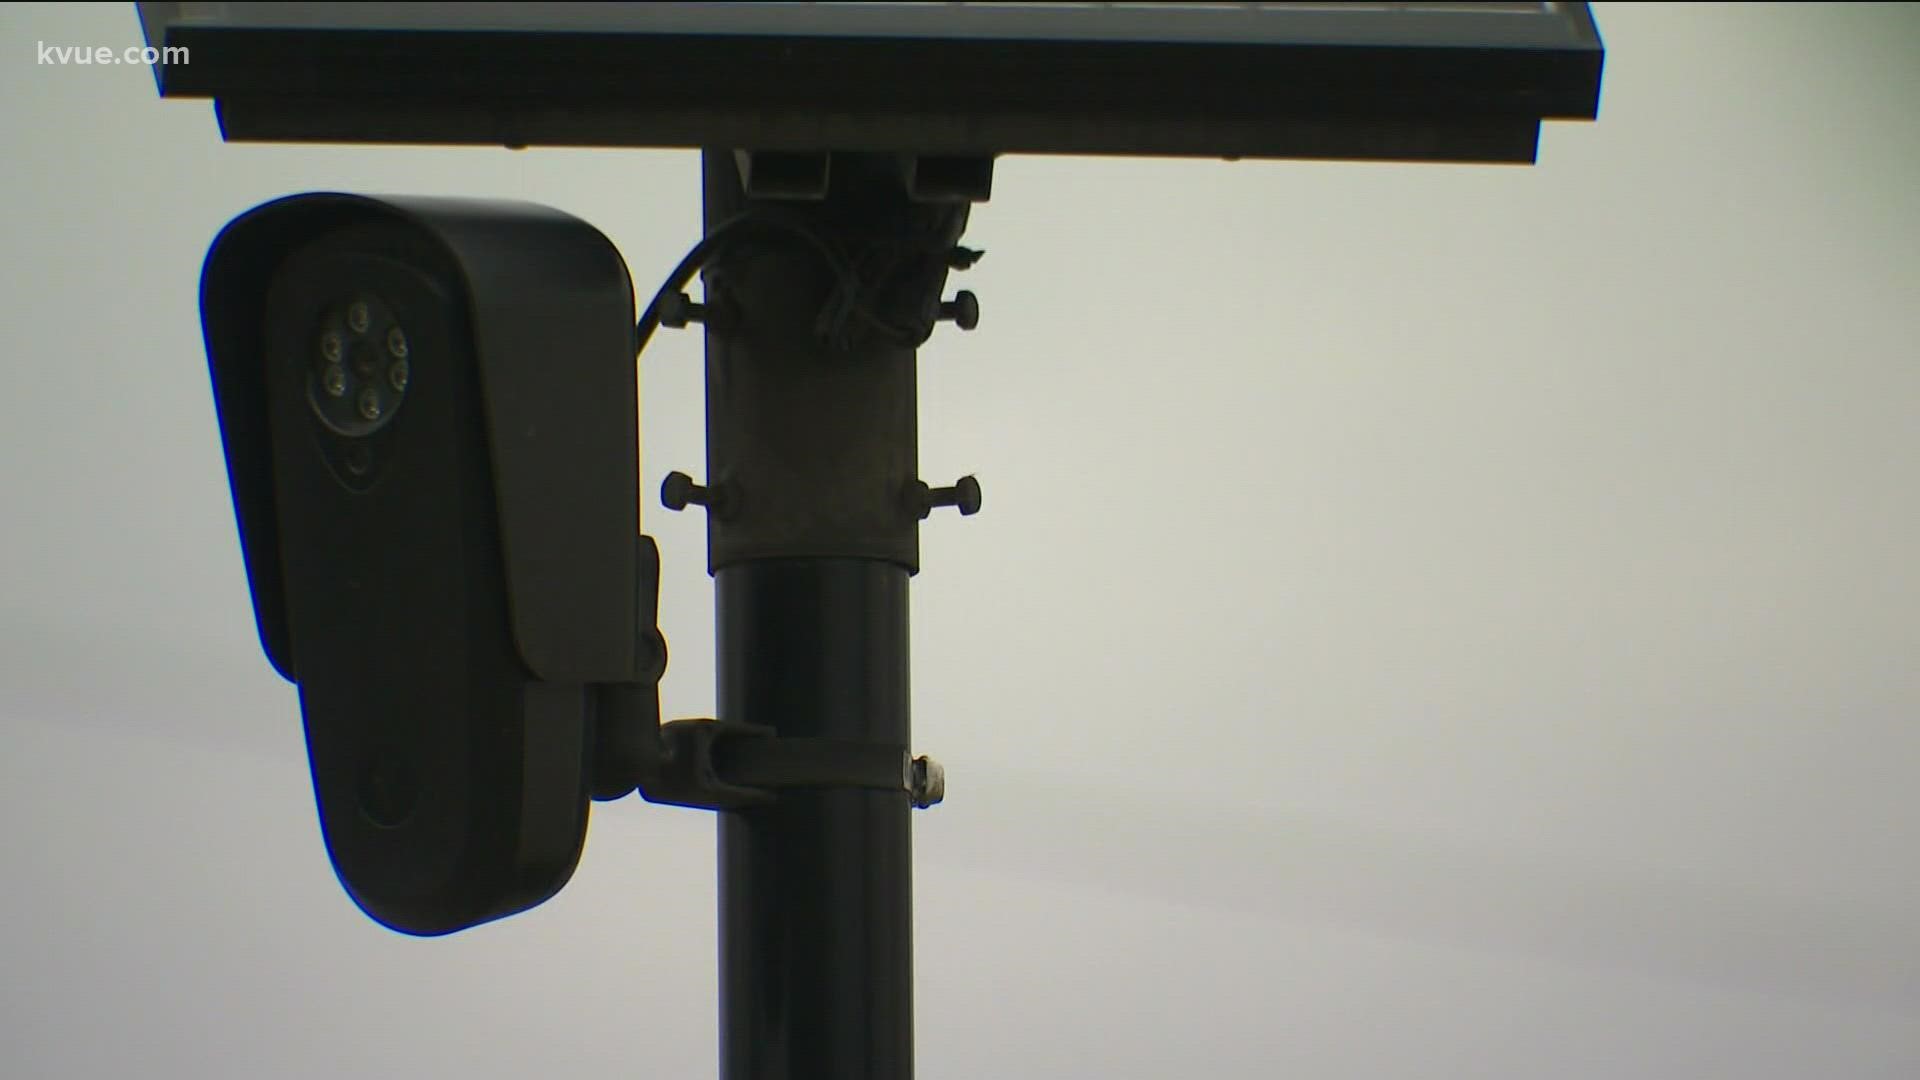 Pflugerville police said the cameras placed in a small community in 2020 helped them recover 19 stolen vehicles and now they are expanding.